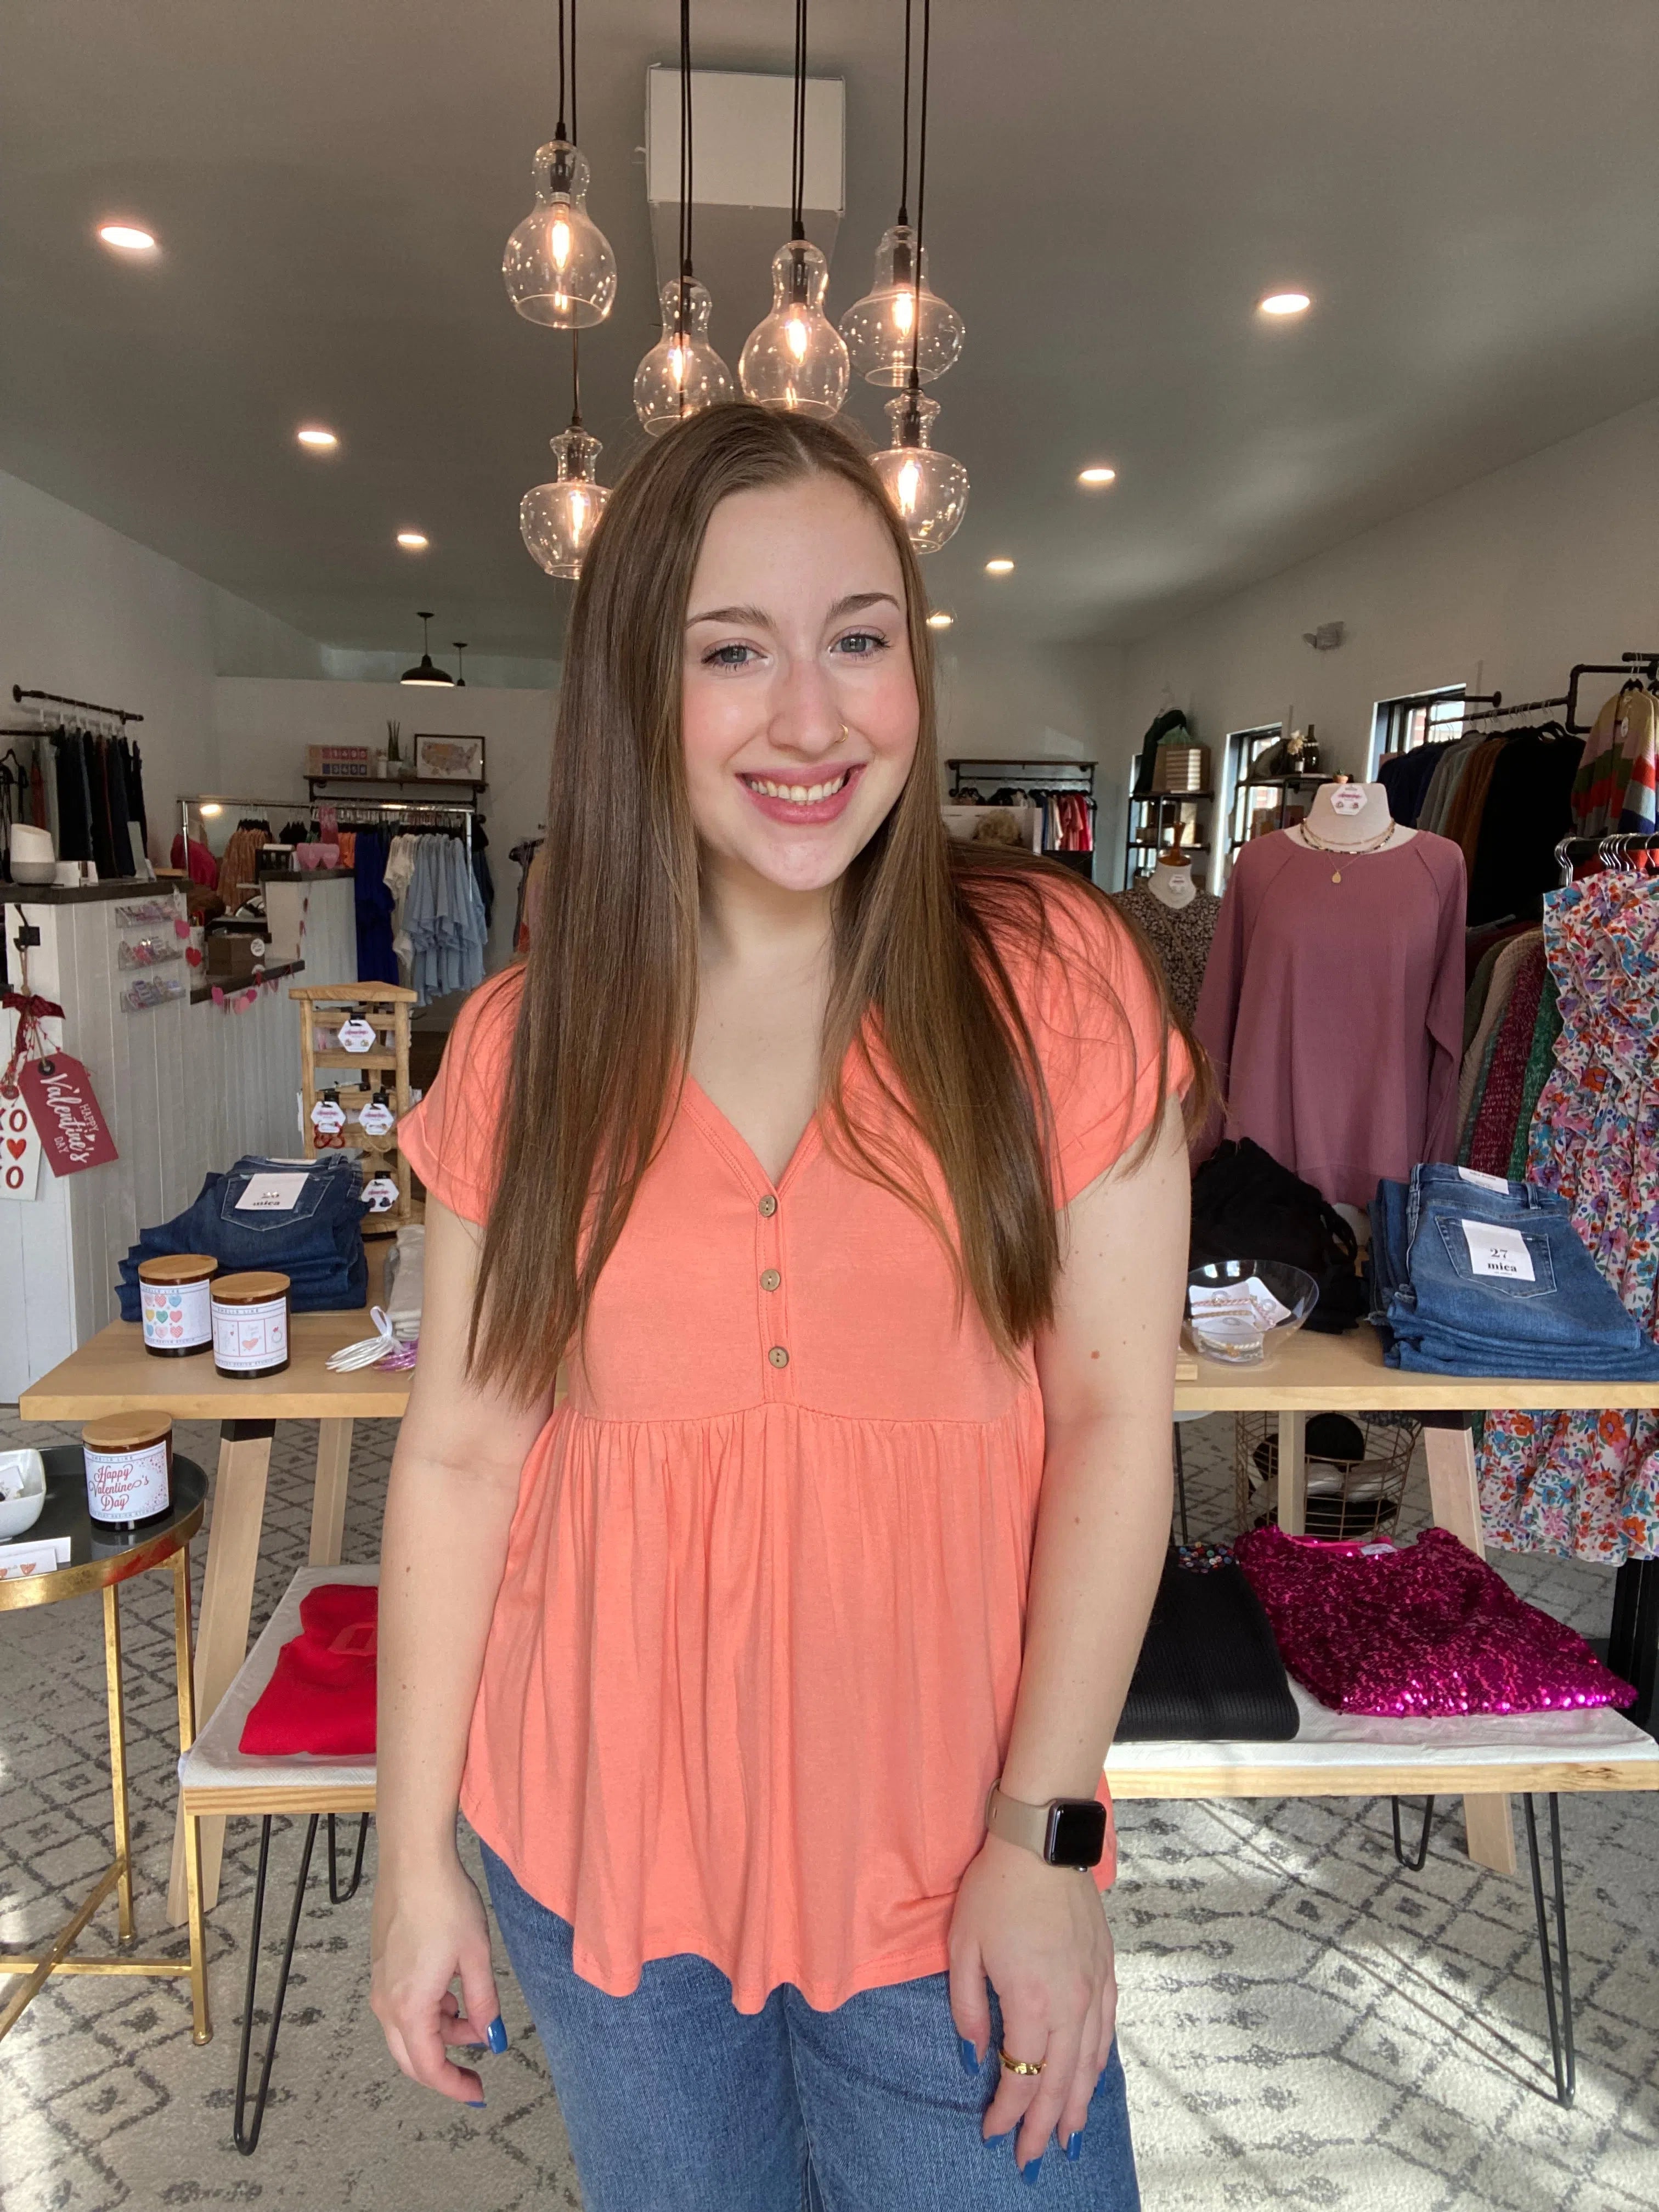 Shop Malia Bamboo Babydoll Top with Buttons - Tropical Coral-Shirts & Tops at Ruby Joy Boutique, a Women's Clothing Store in Pickerington, Ohio